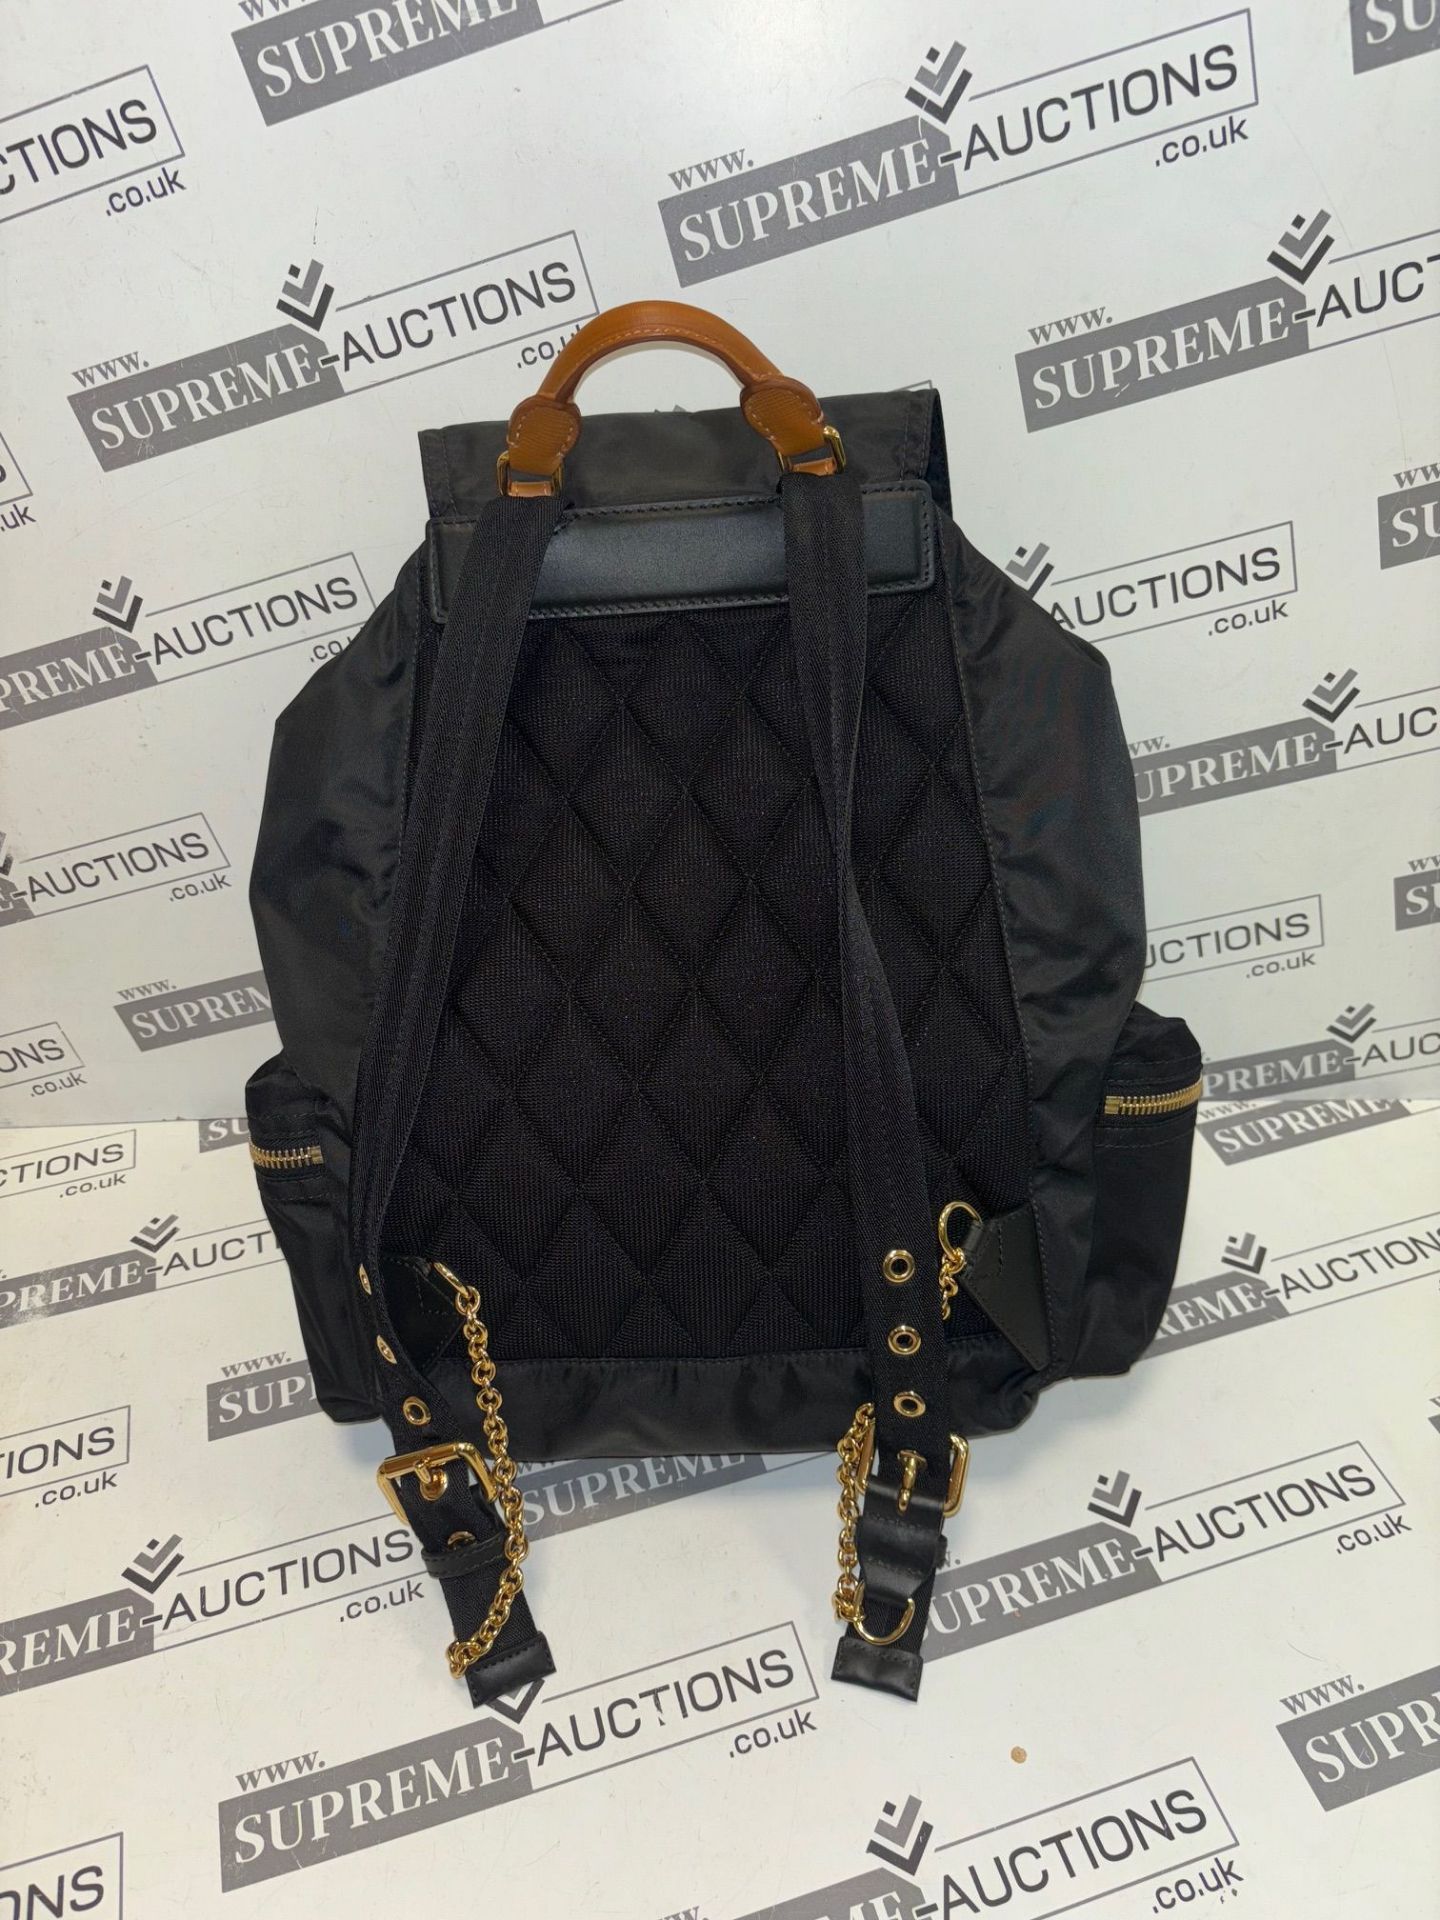 BURBERRY black nylon backpack. Personalised ZYL. 35x35cm - Image 7 of 11